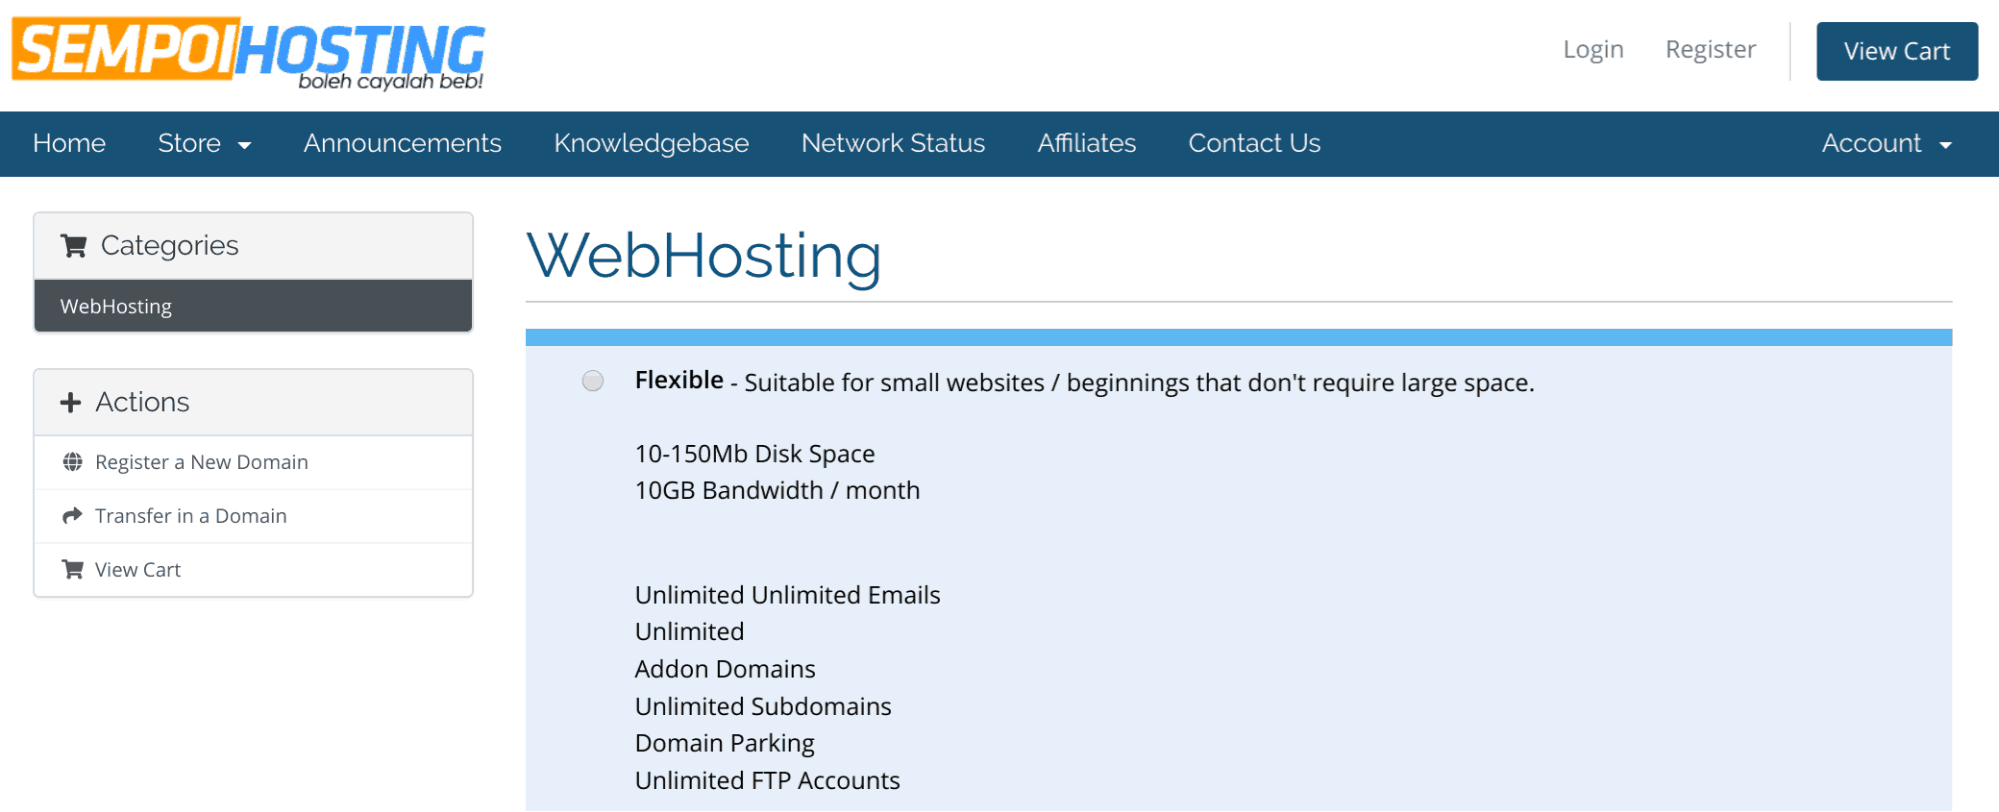 Sempoihosting-overview1